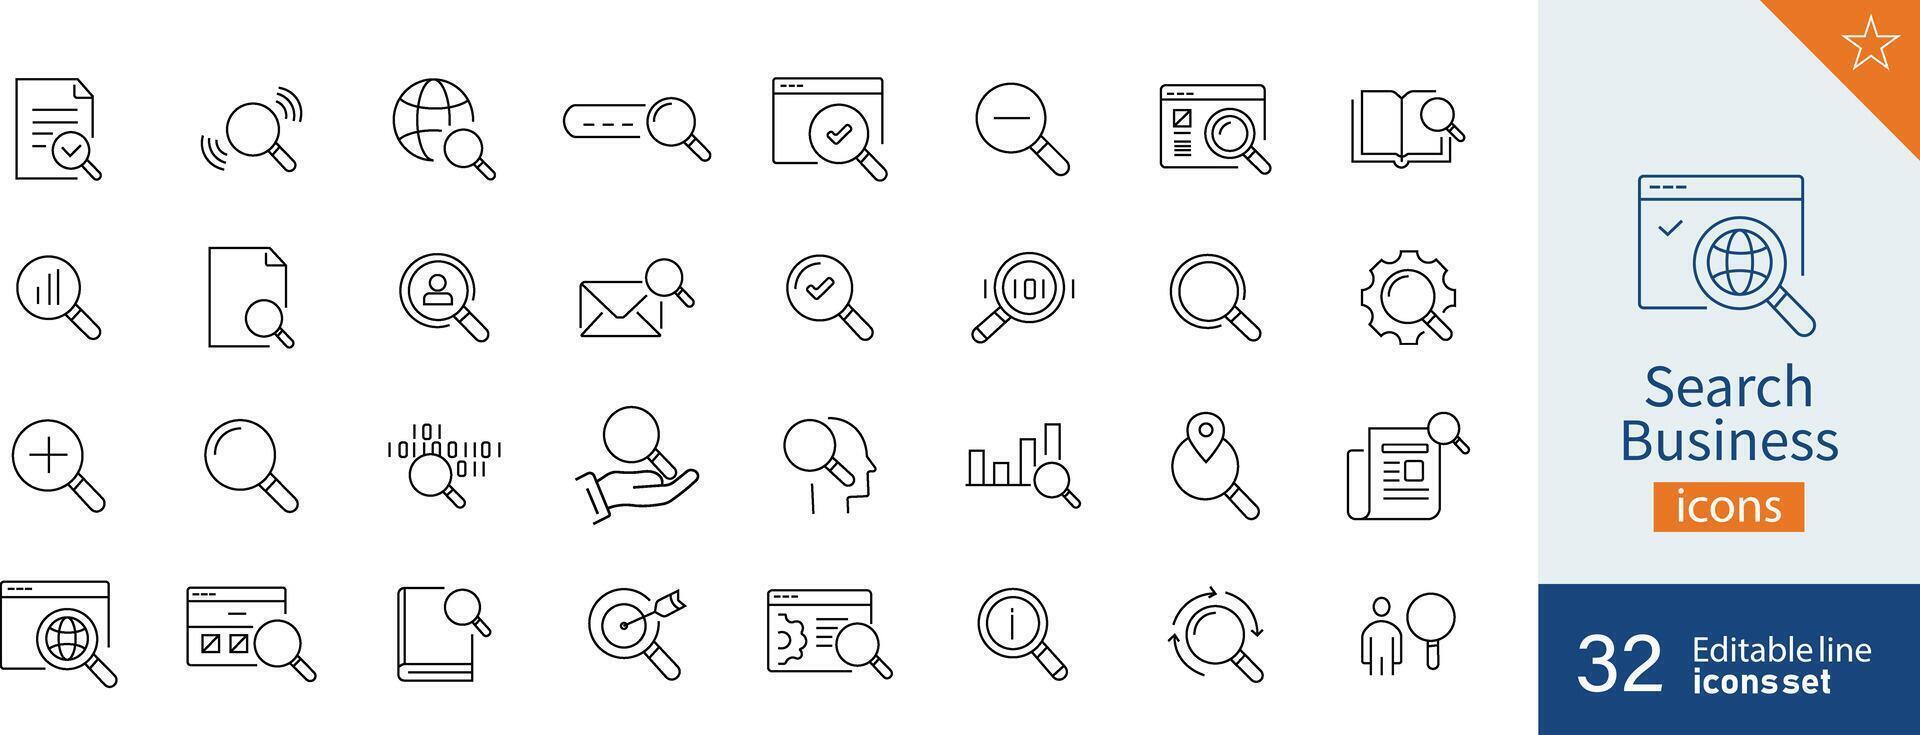 Set of 32 Search Business web icons in line style. Document, book, coding, research, icon. Vector illustration.